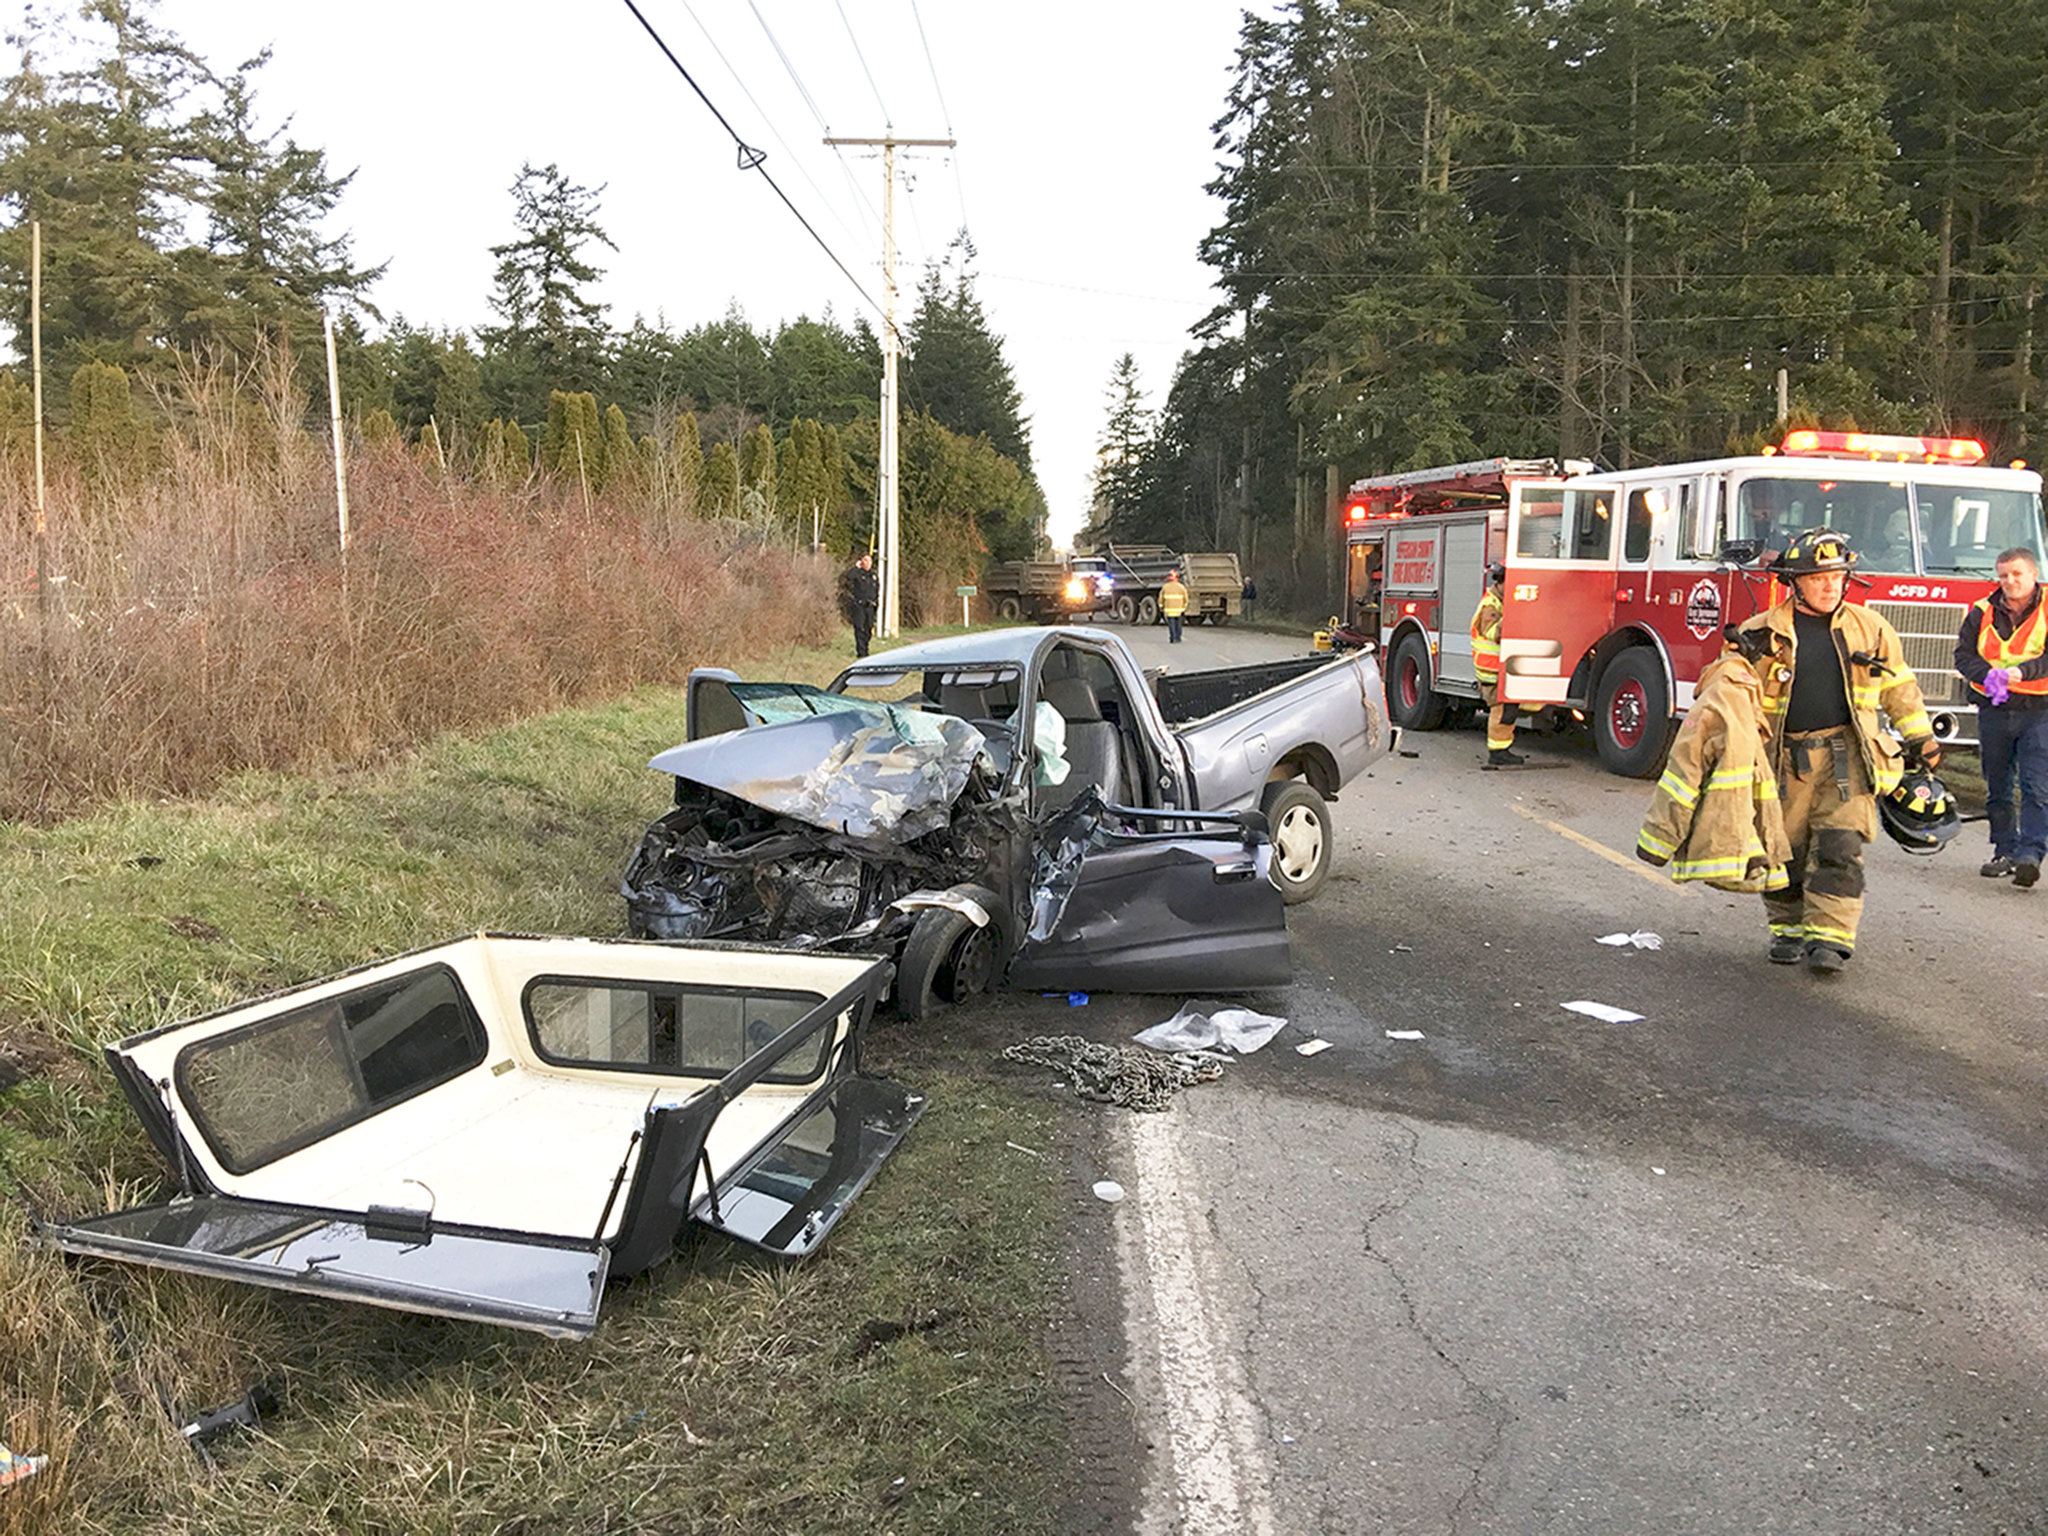 Port Townsend woman in critical condition after head-on wreck with dump truck